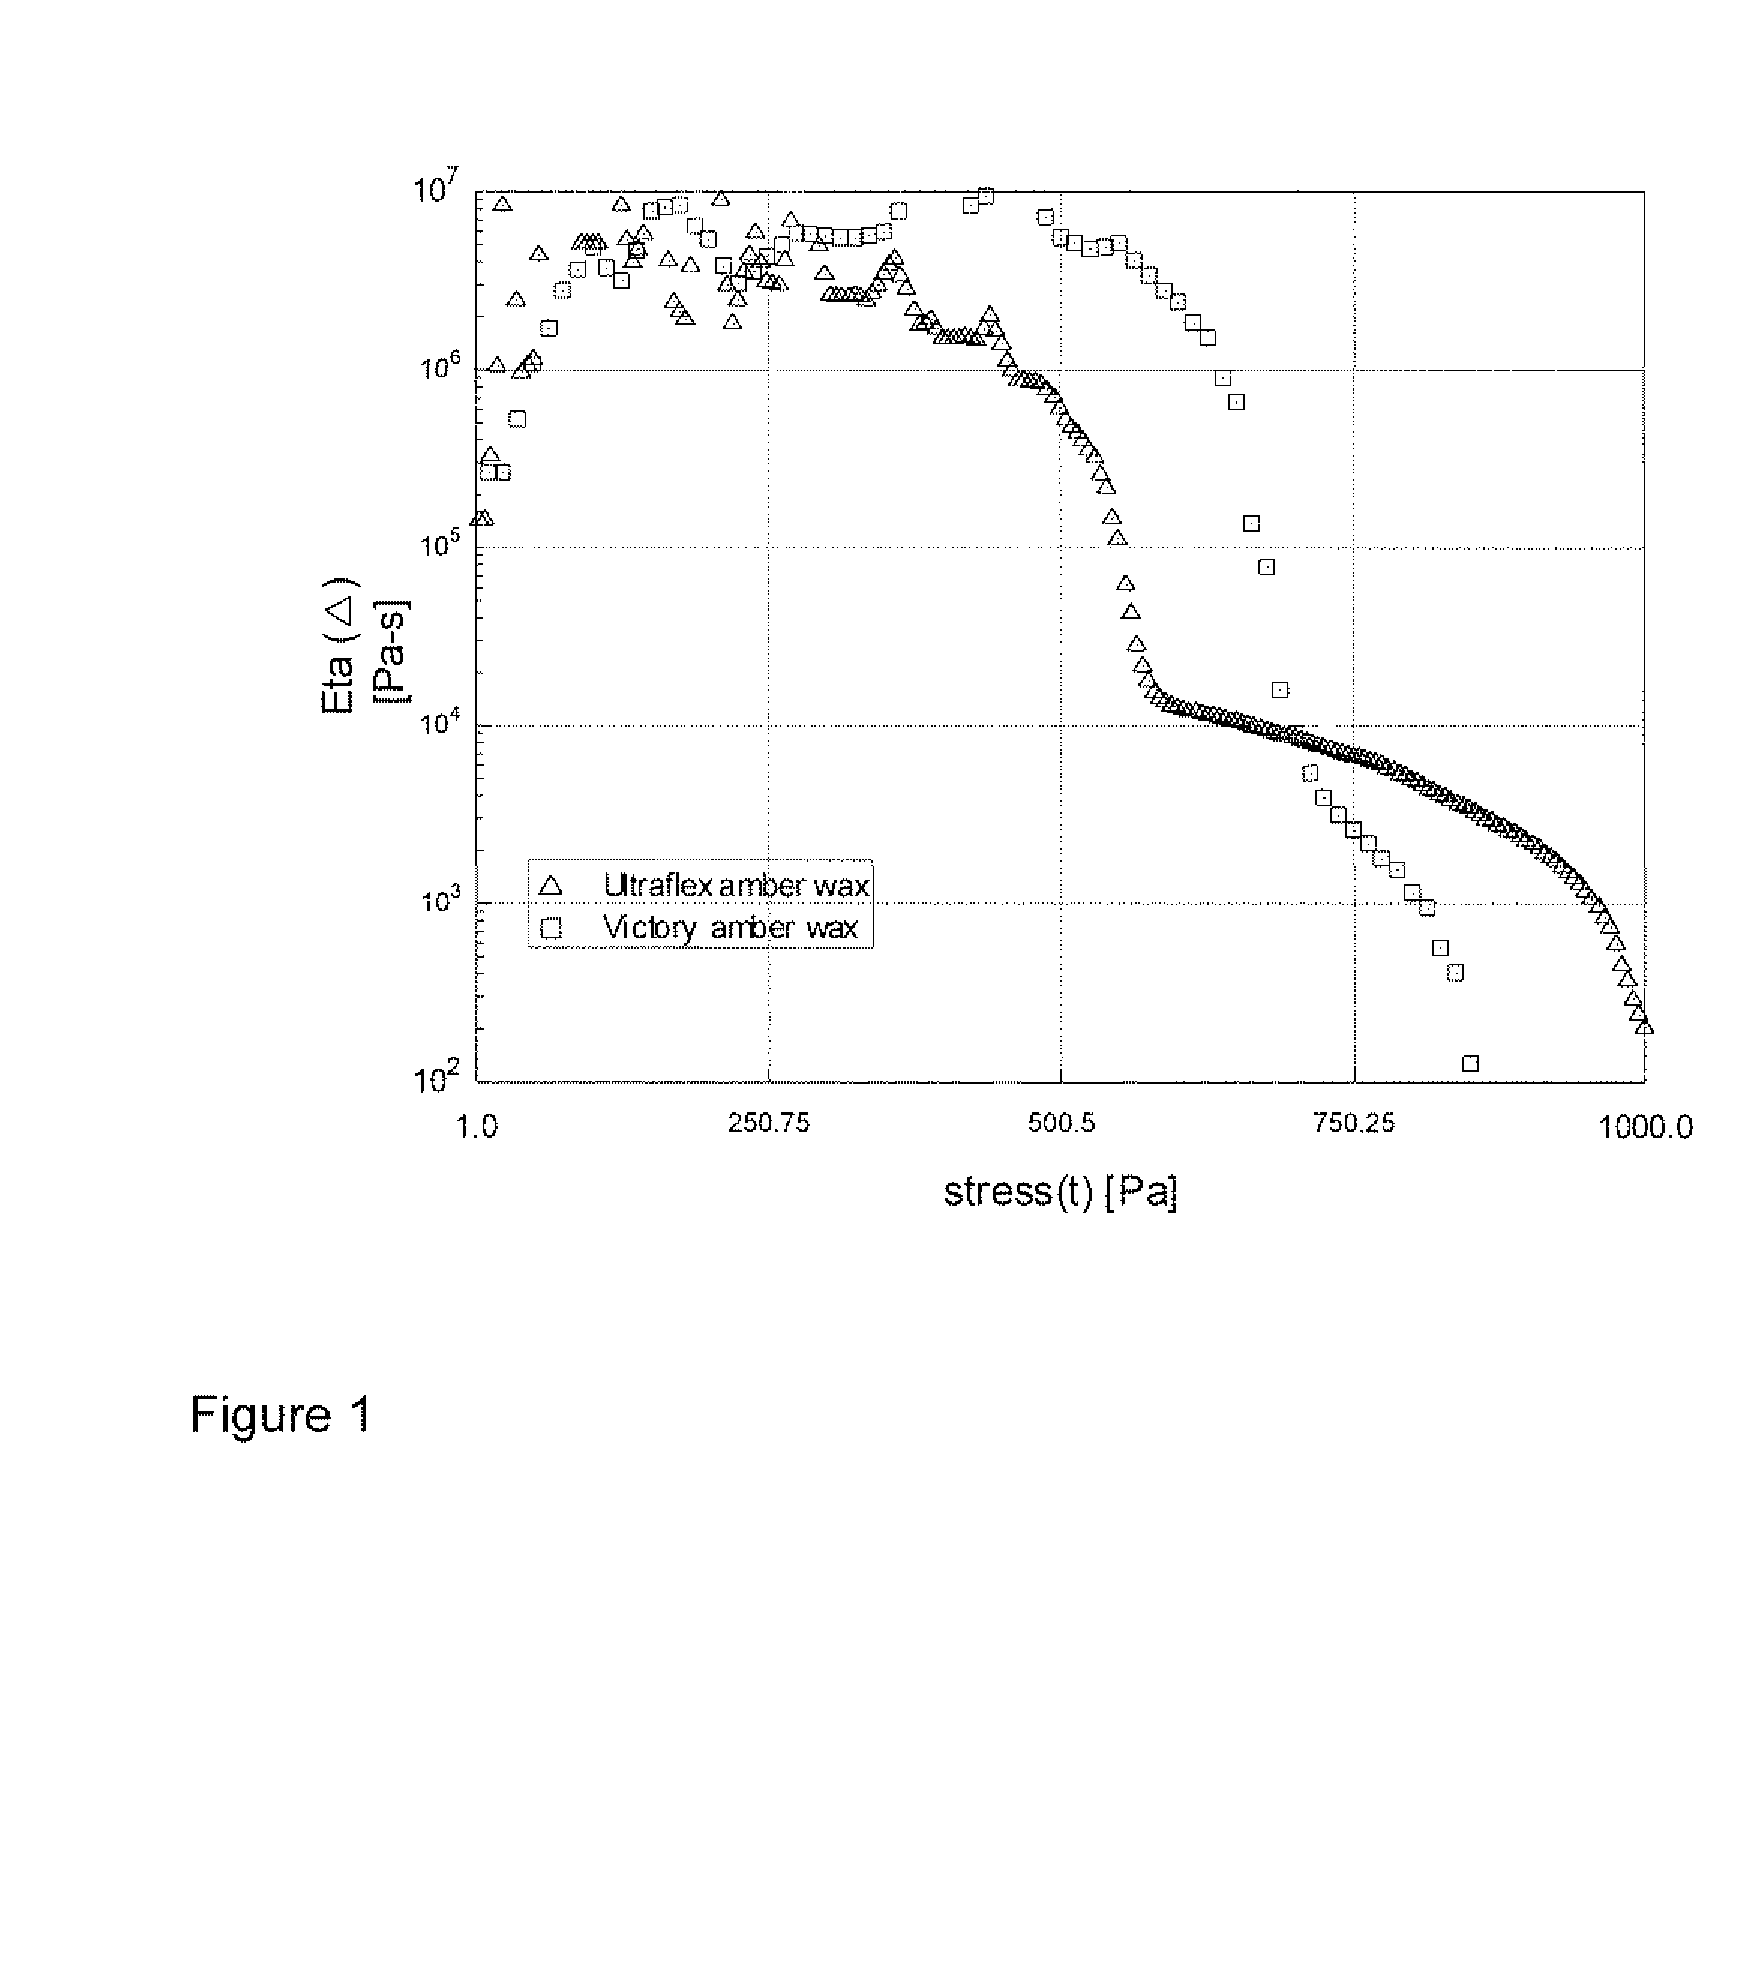 Personal product bar compositions comprising crystalline wax structured premix or delivery vehicle